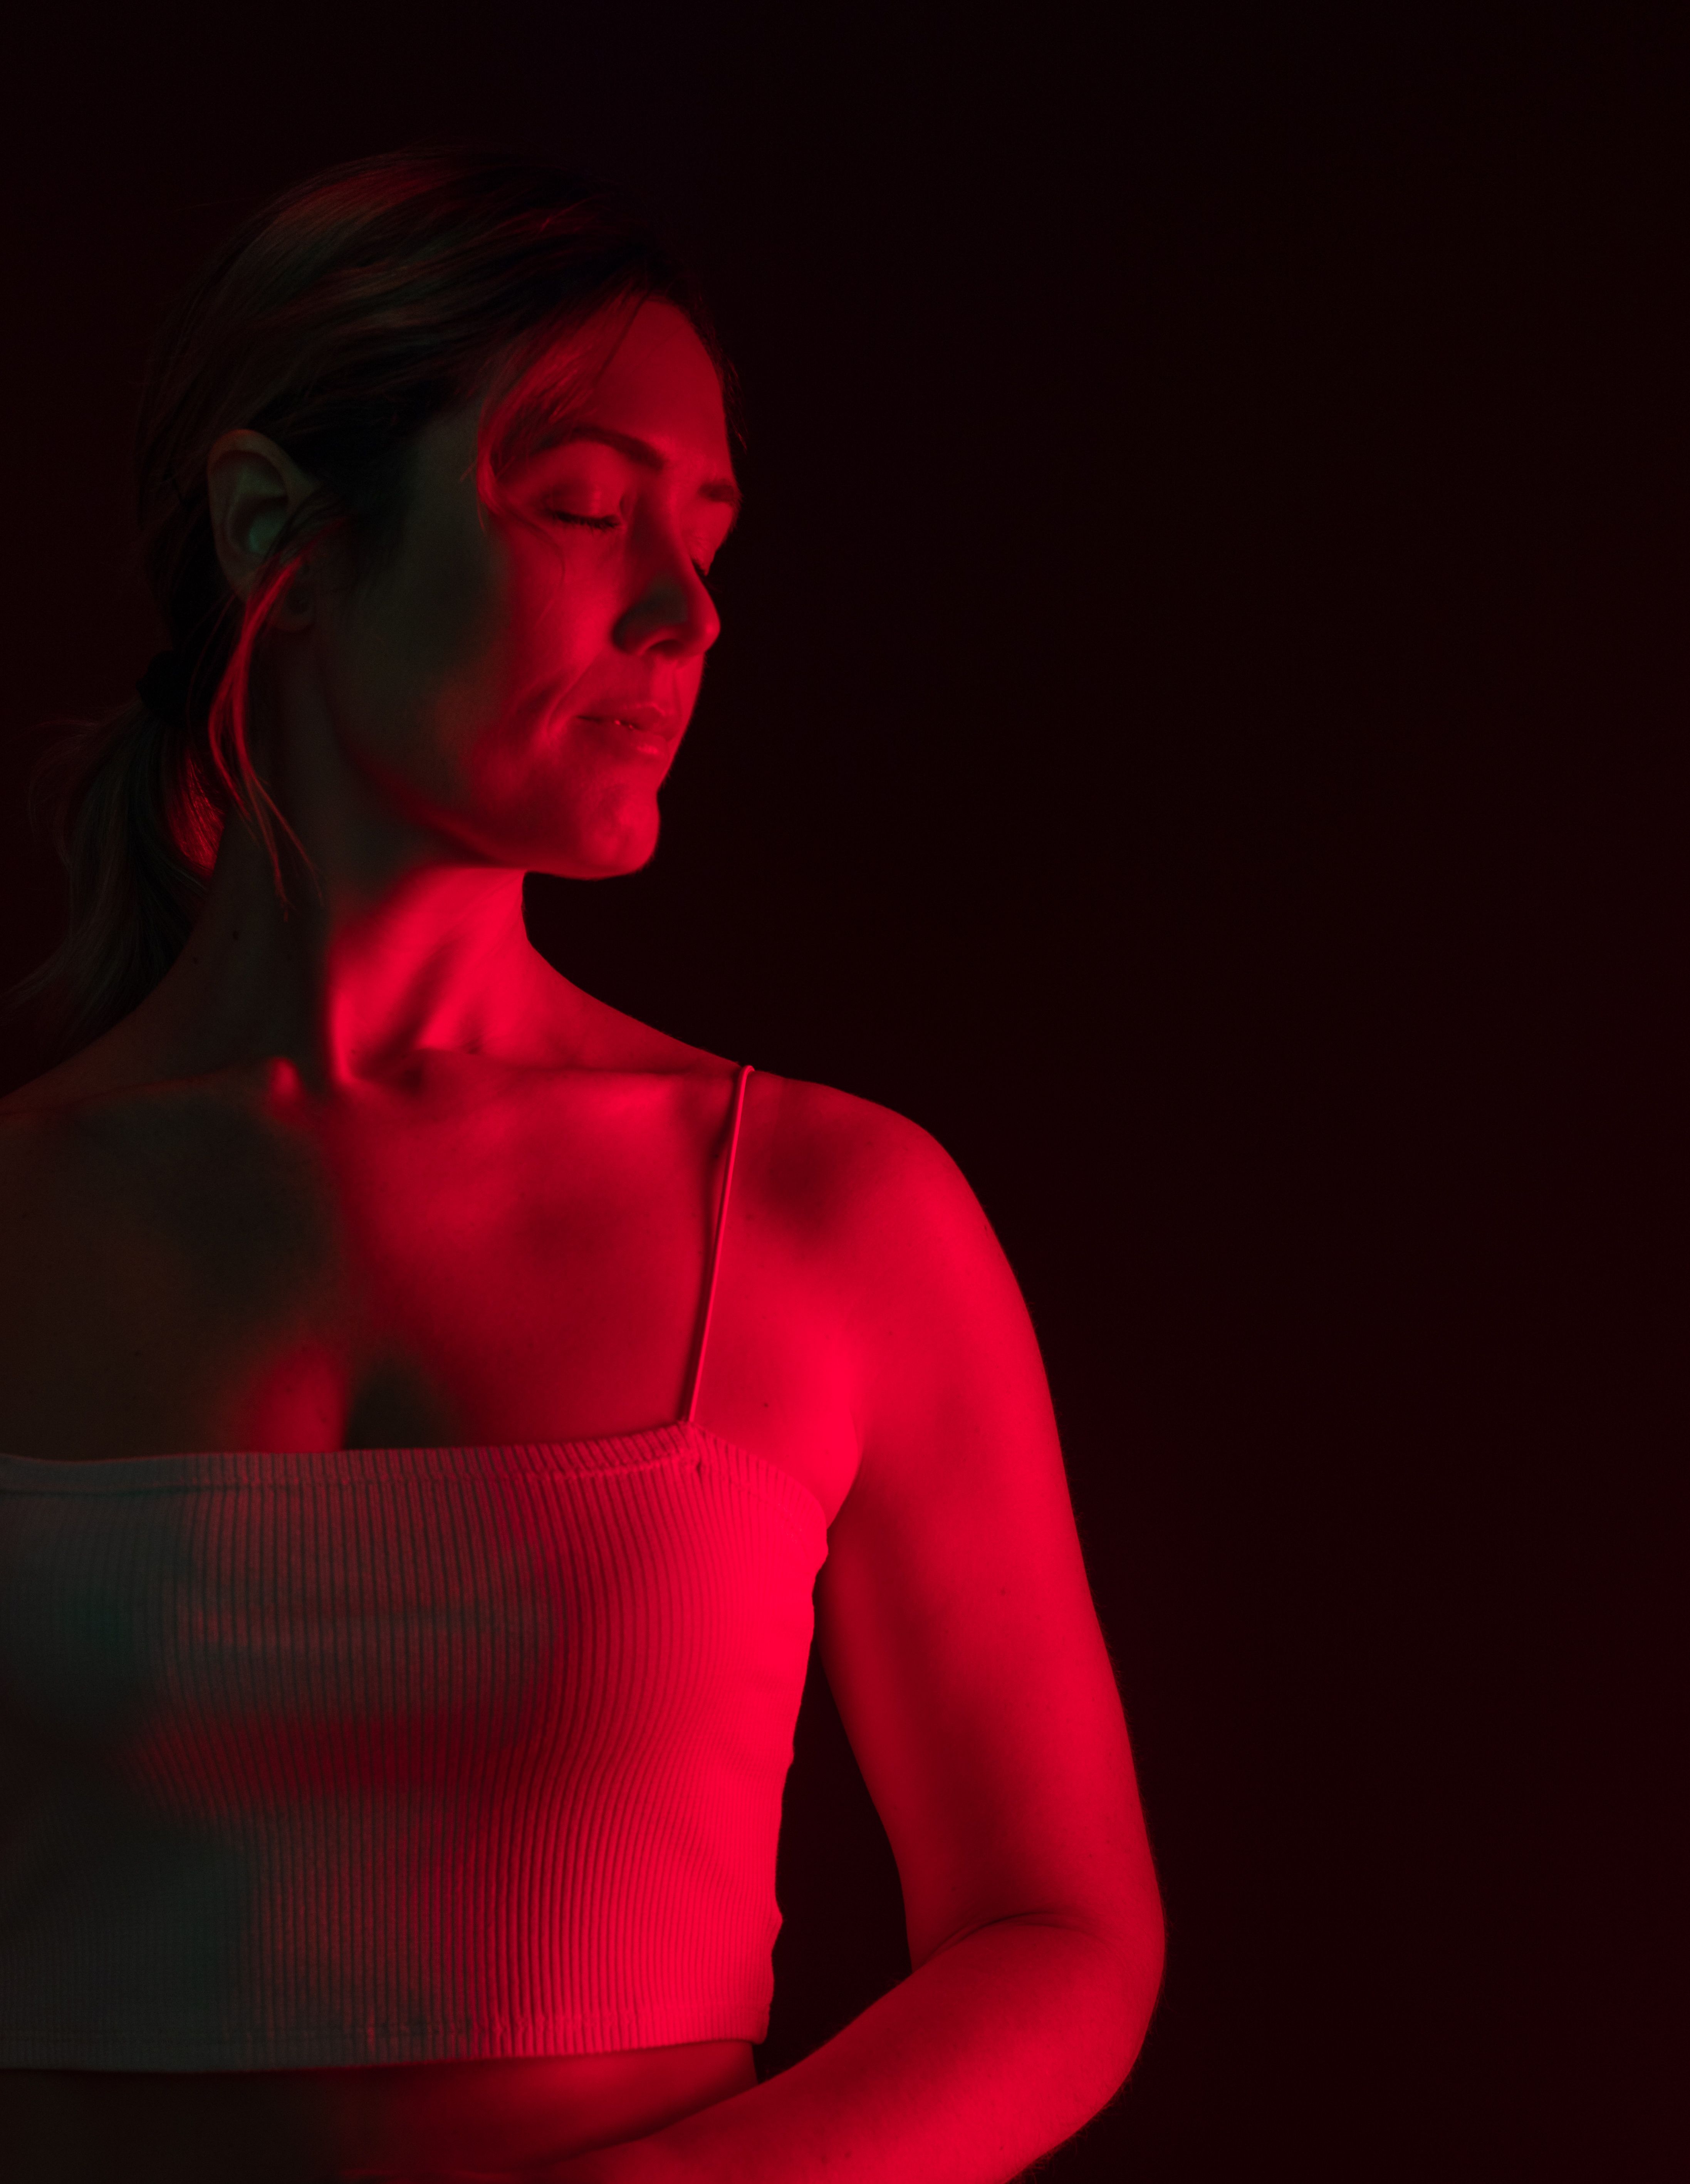 A woman standing in red light - experience what a photofacial can do for you.